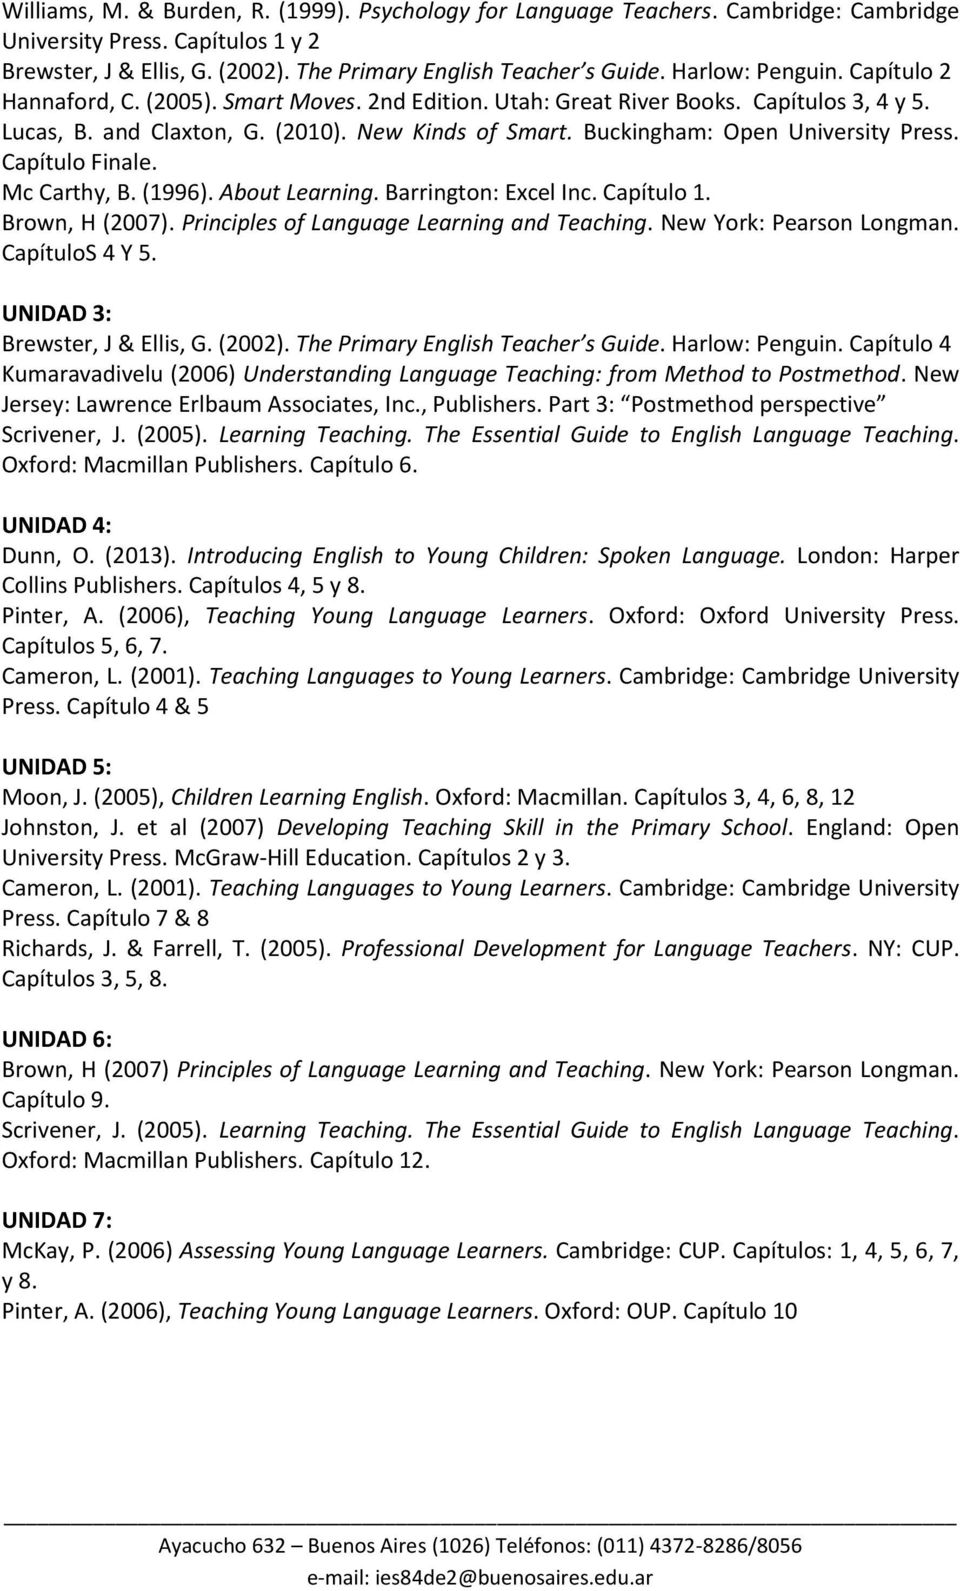 Buckingham: Open University Press. Capítulo Finale. Mc Carthy, B. (1996). About Learning. Barrington: Excel Inc. Capítulo 1. Brown, H (2007). Principles of Language Learning and Teaching.